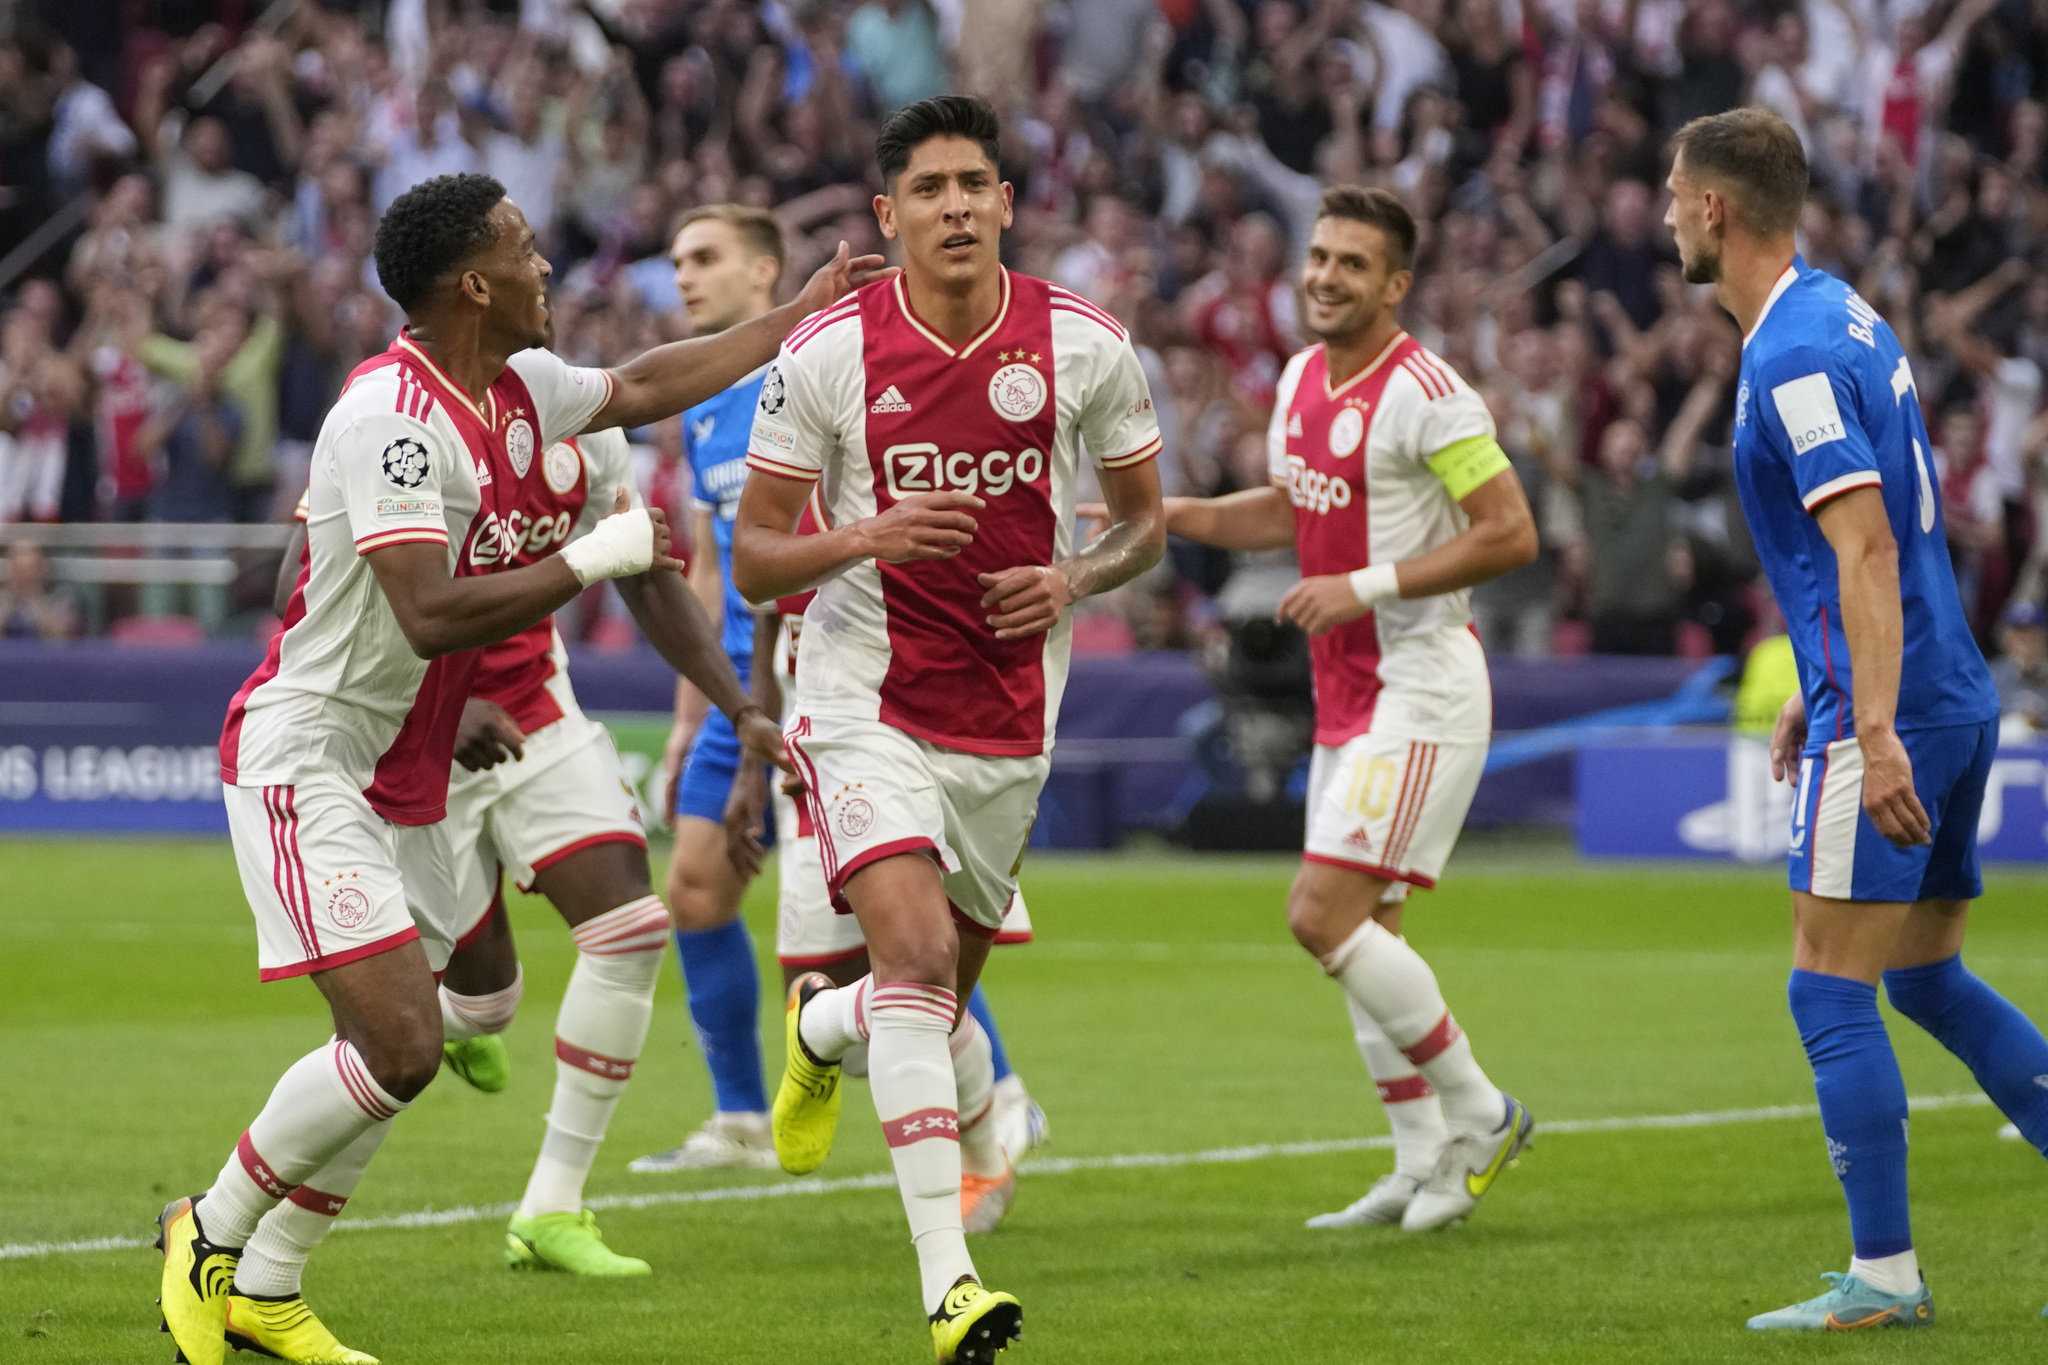  lt;HIT gt;Ajax lt;/HIT gt;'s Edson Alvarez celebrates after scoring his side's first goal during a Champions League group A soccer match between  lt;HIT gt;Ajax lt;/HIT gt; and Rangers at the Johan Cruyff ArenA in Amsterdam, Netherlands, Wednesday Sept. 7, 2022. (AP Photo/Peter Dejong)